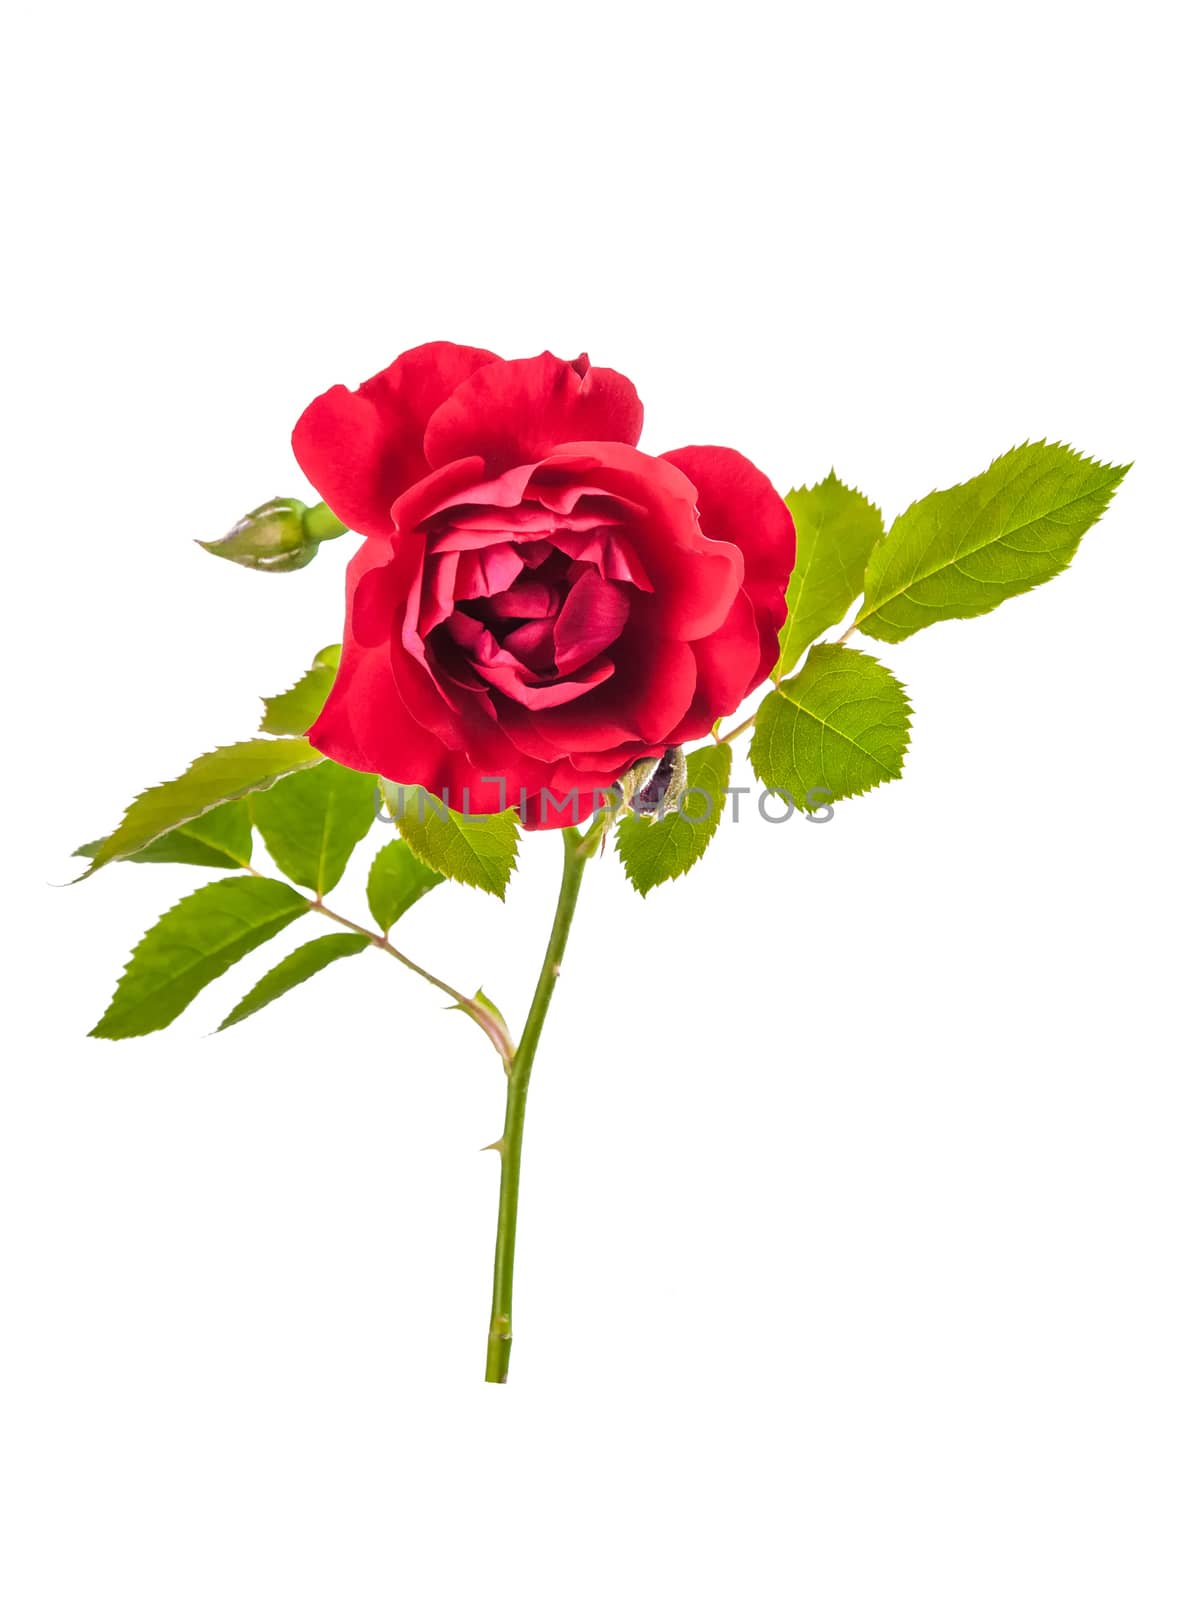 Rose red flowers with leaves isolated on white backround